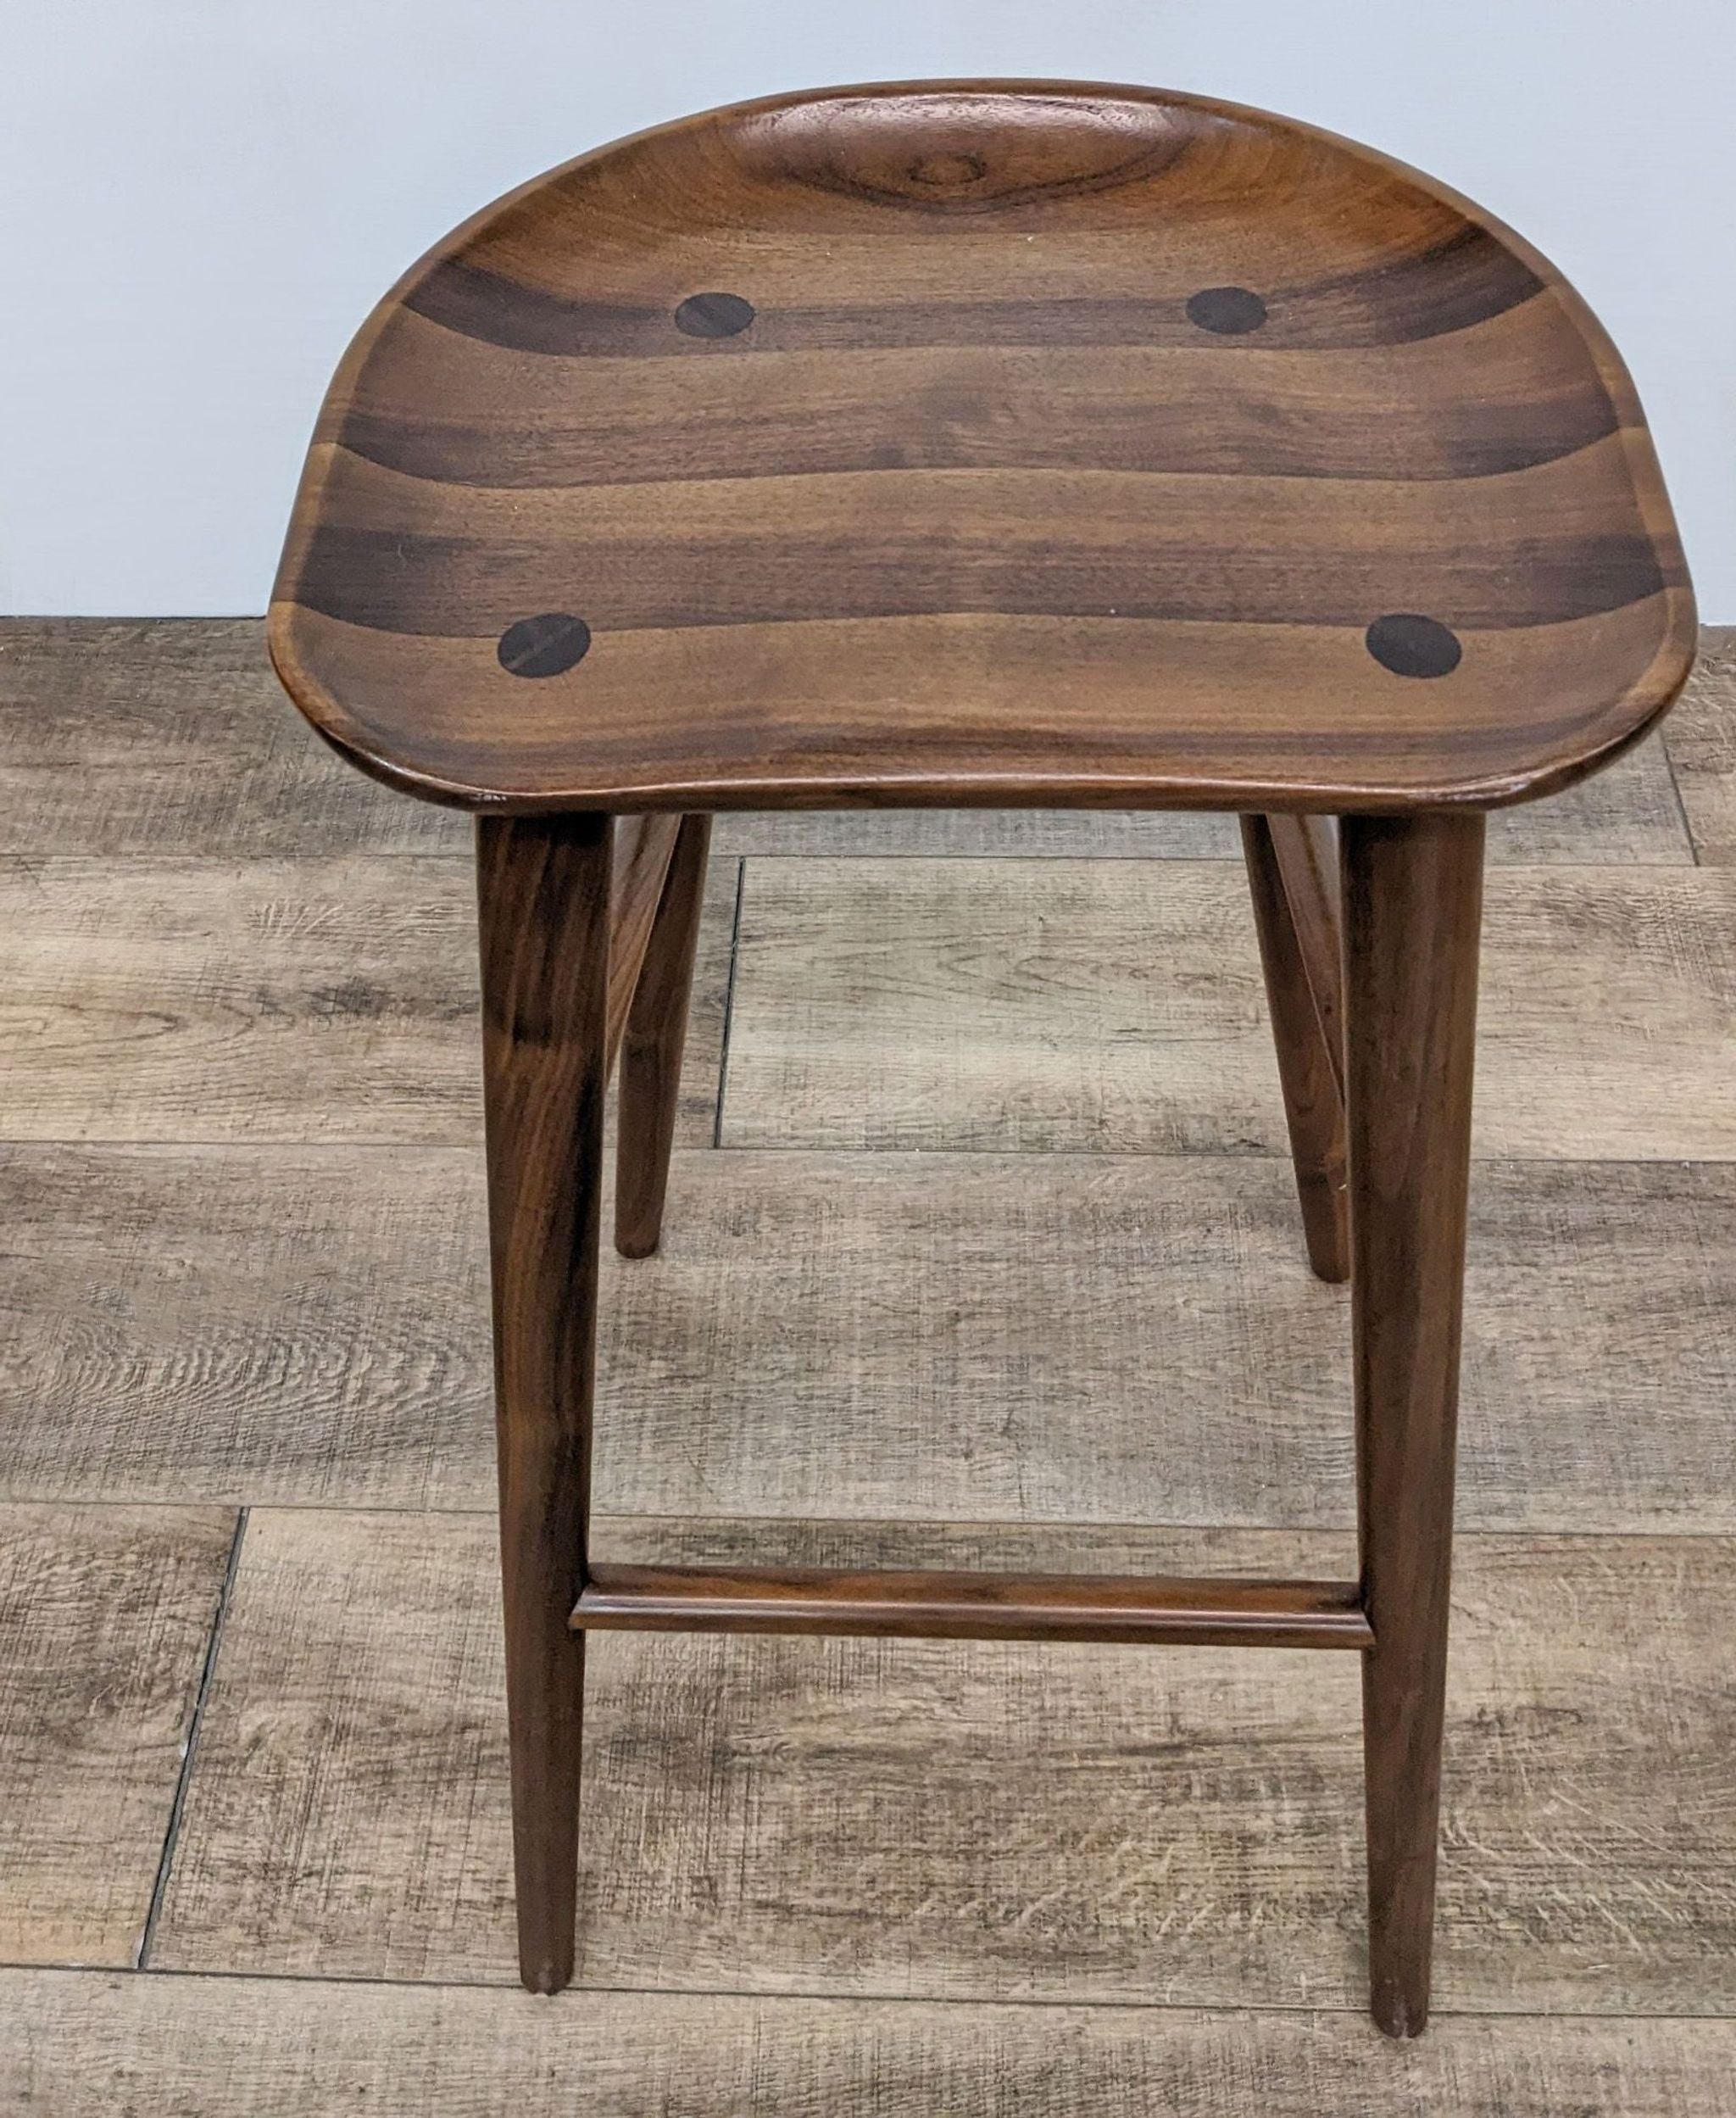 2. Top-down view of a dark wooden stool showing stripes and circular marks on the seat, with robust legs on a textured floor.